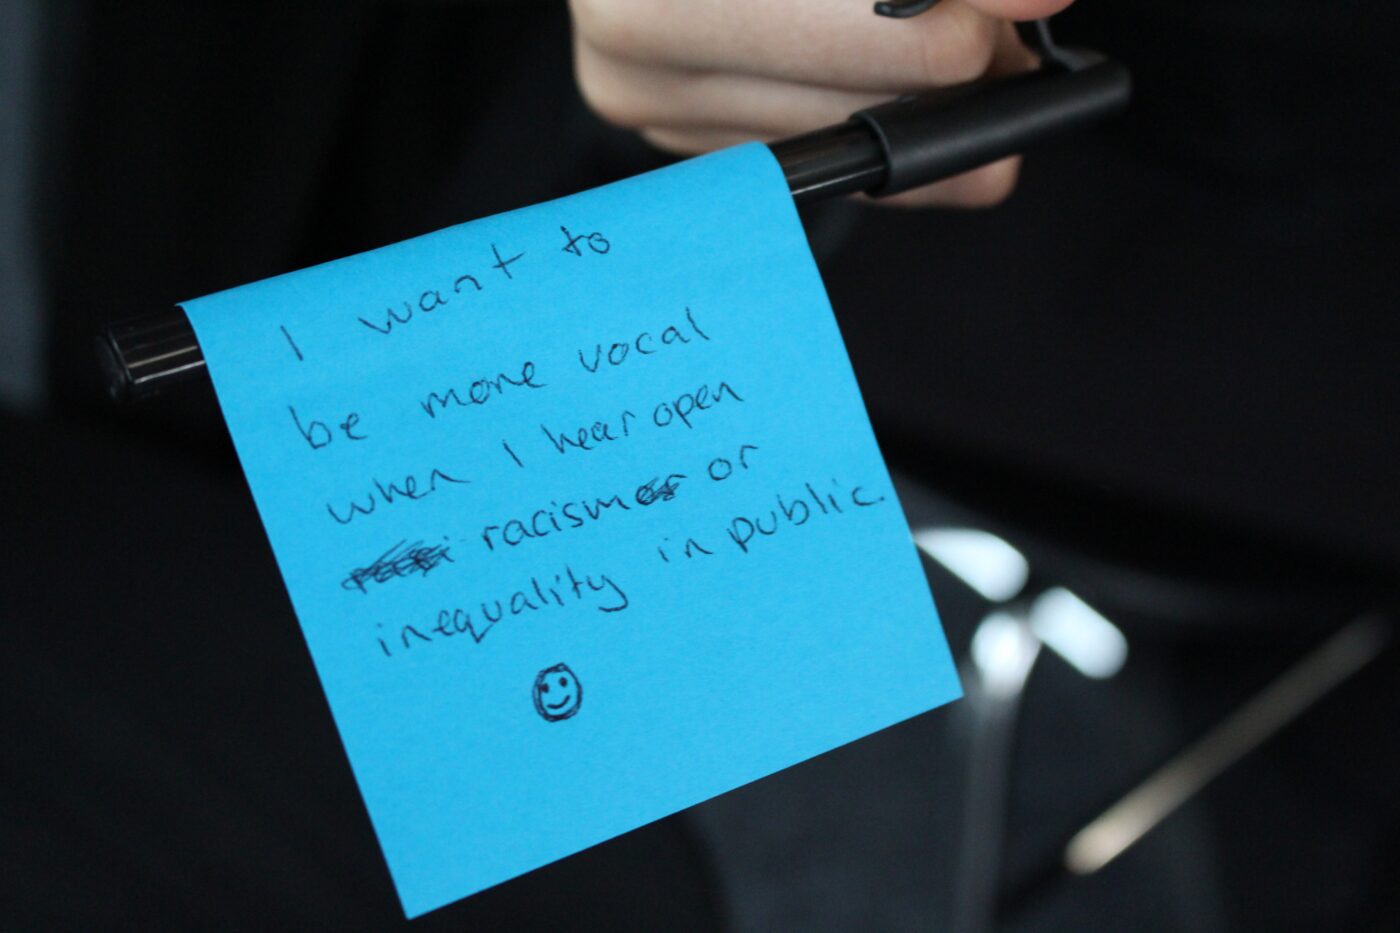 Written on a post-it note are the words I want to be more vocal when I hear open racism or inequality in public.